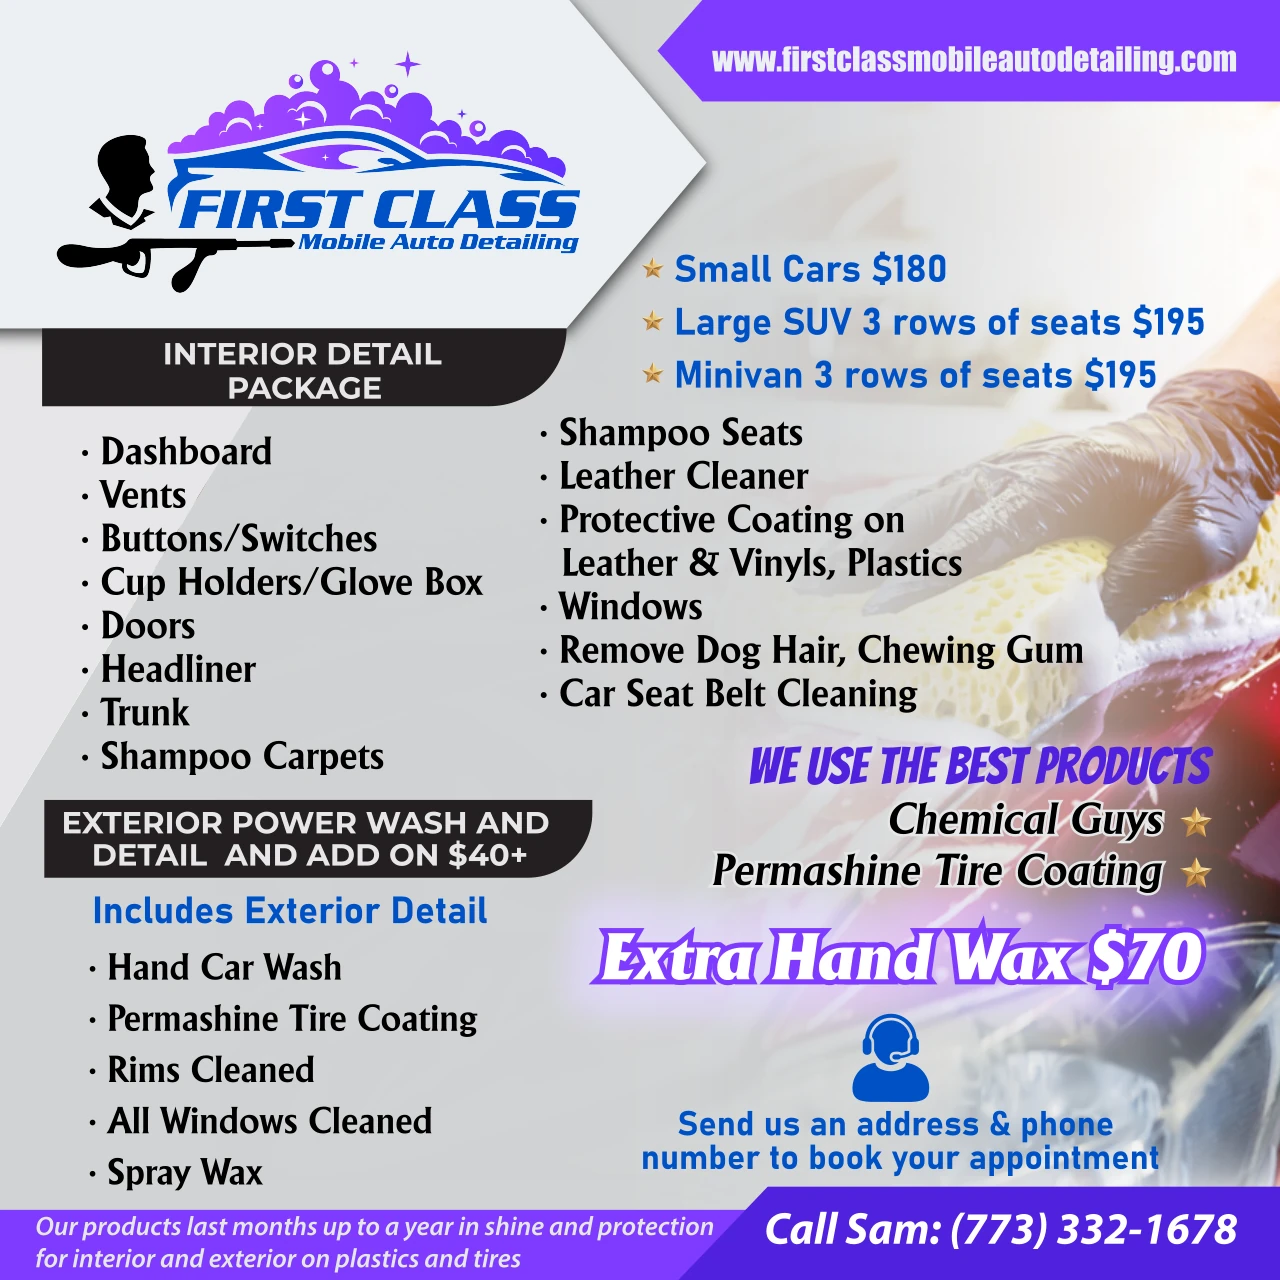 First Class Mobile Auto Detailing